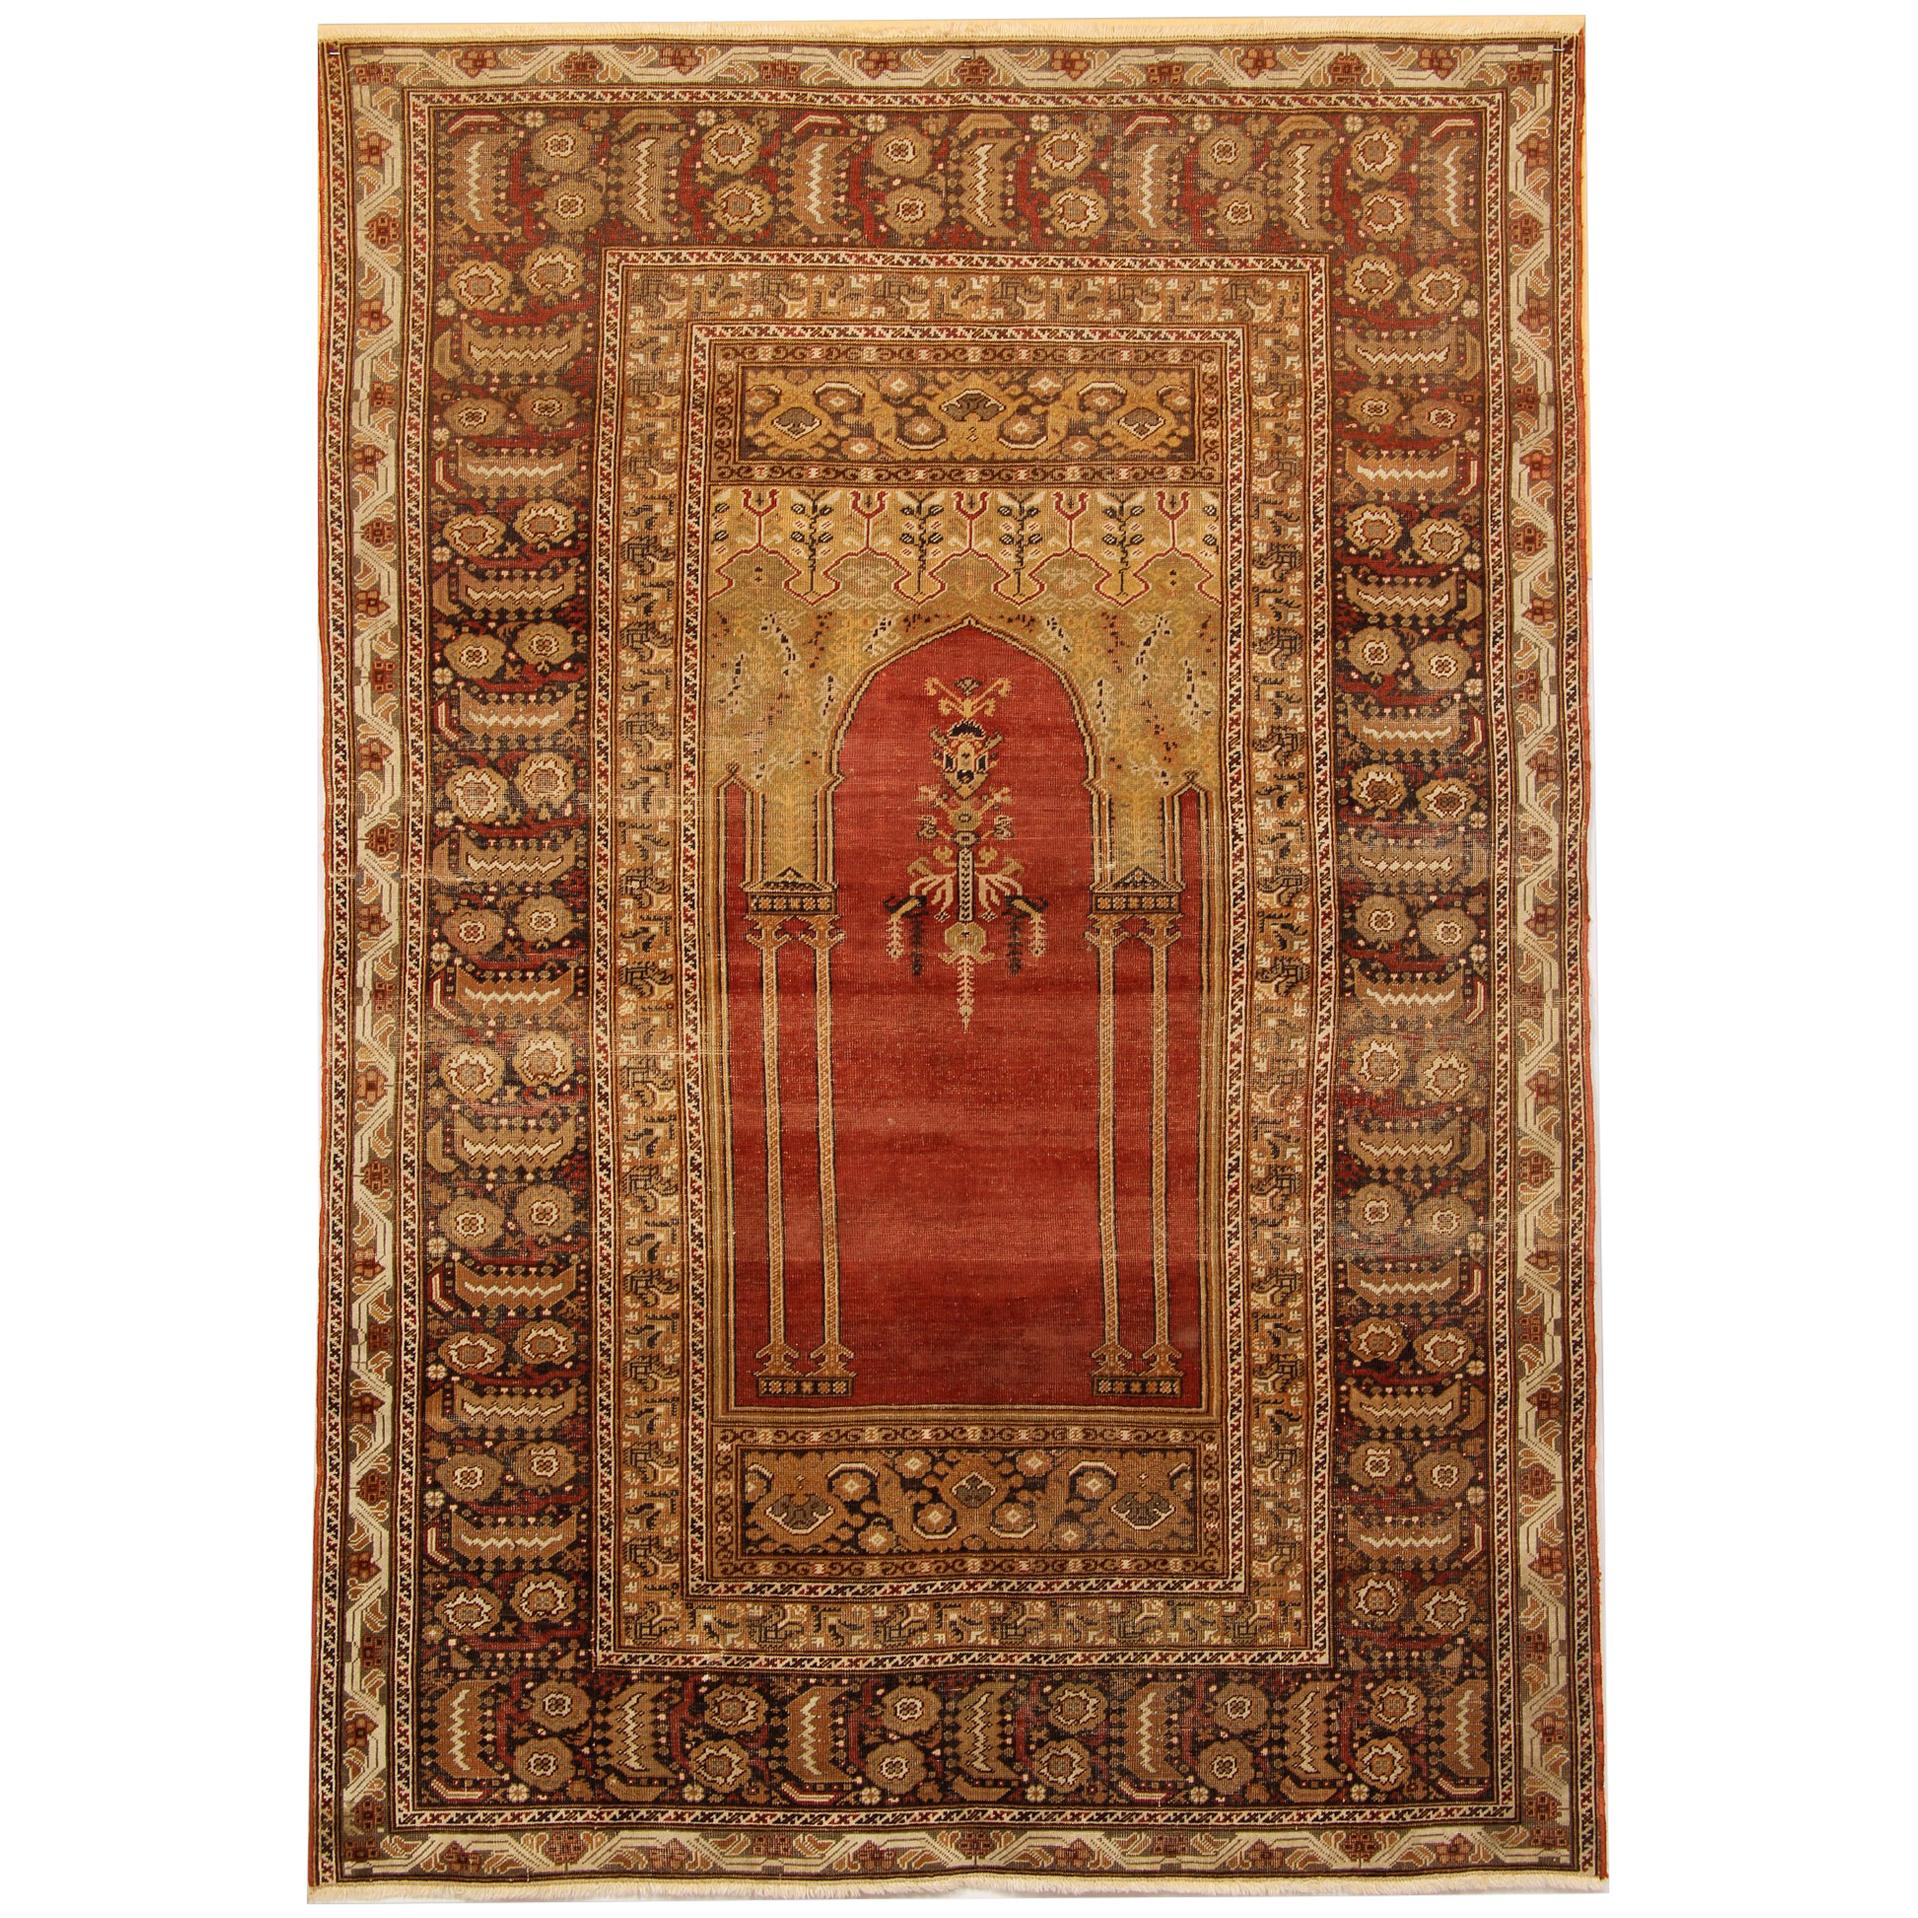 Red Antique Rugs, Traditional Carpet Turkish Rug, Mihrabi Living Room Rug For Sale